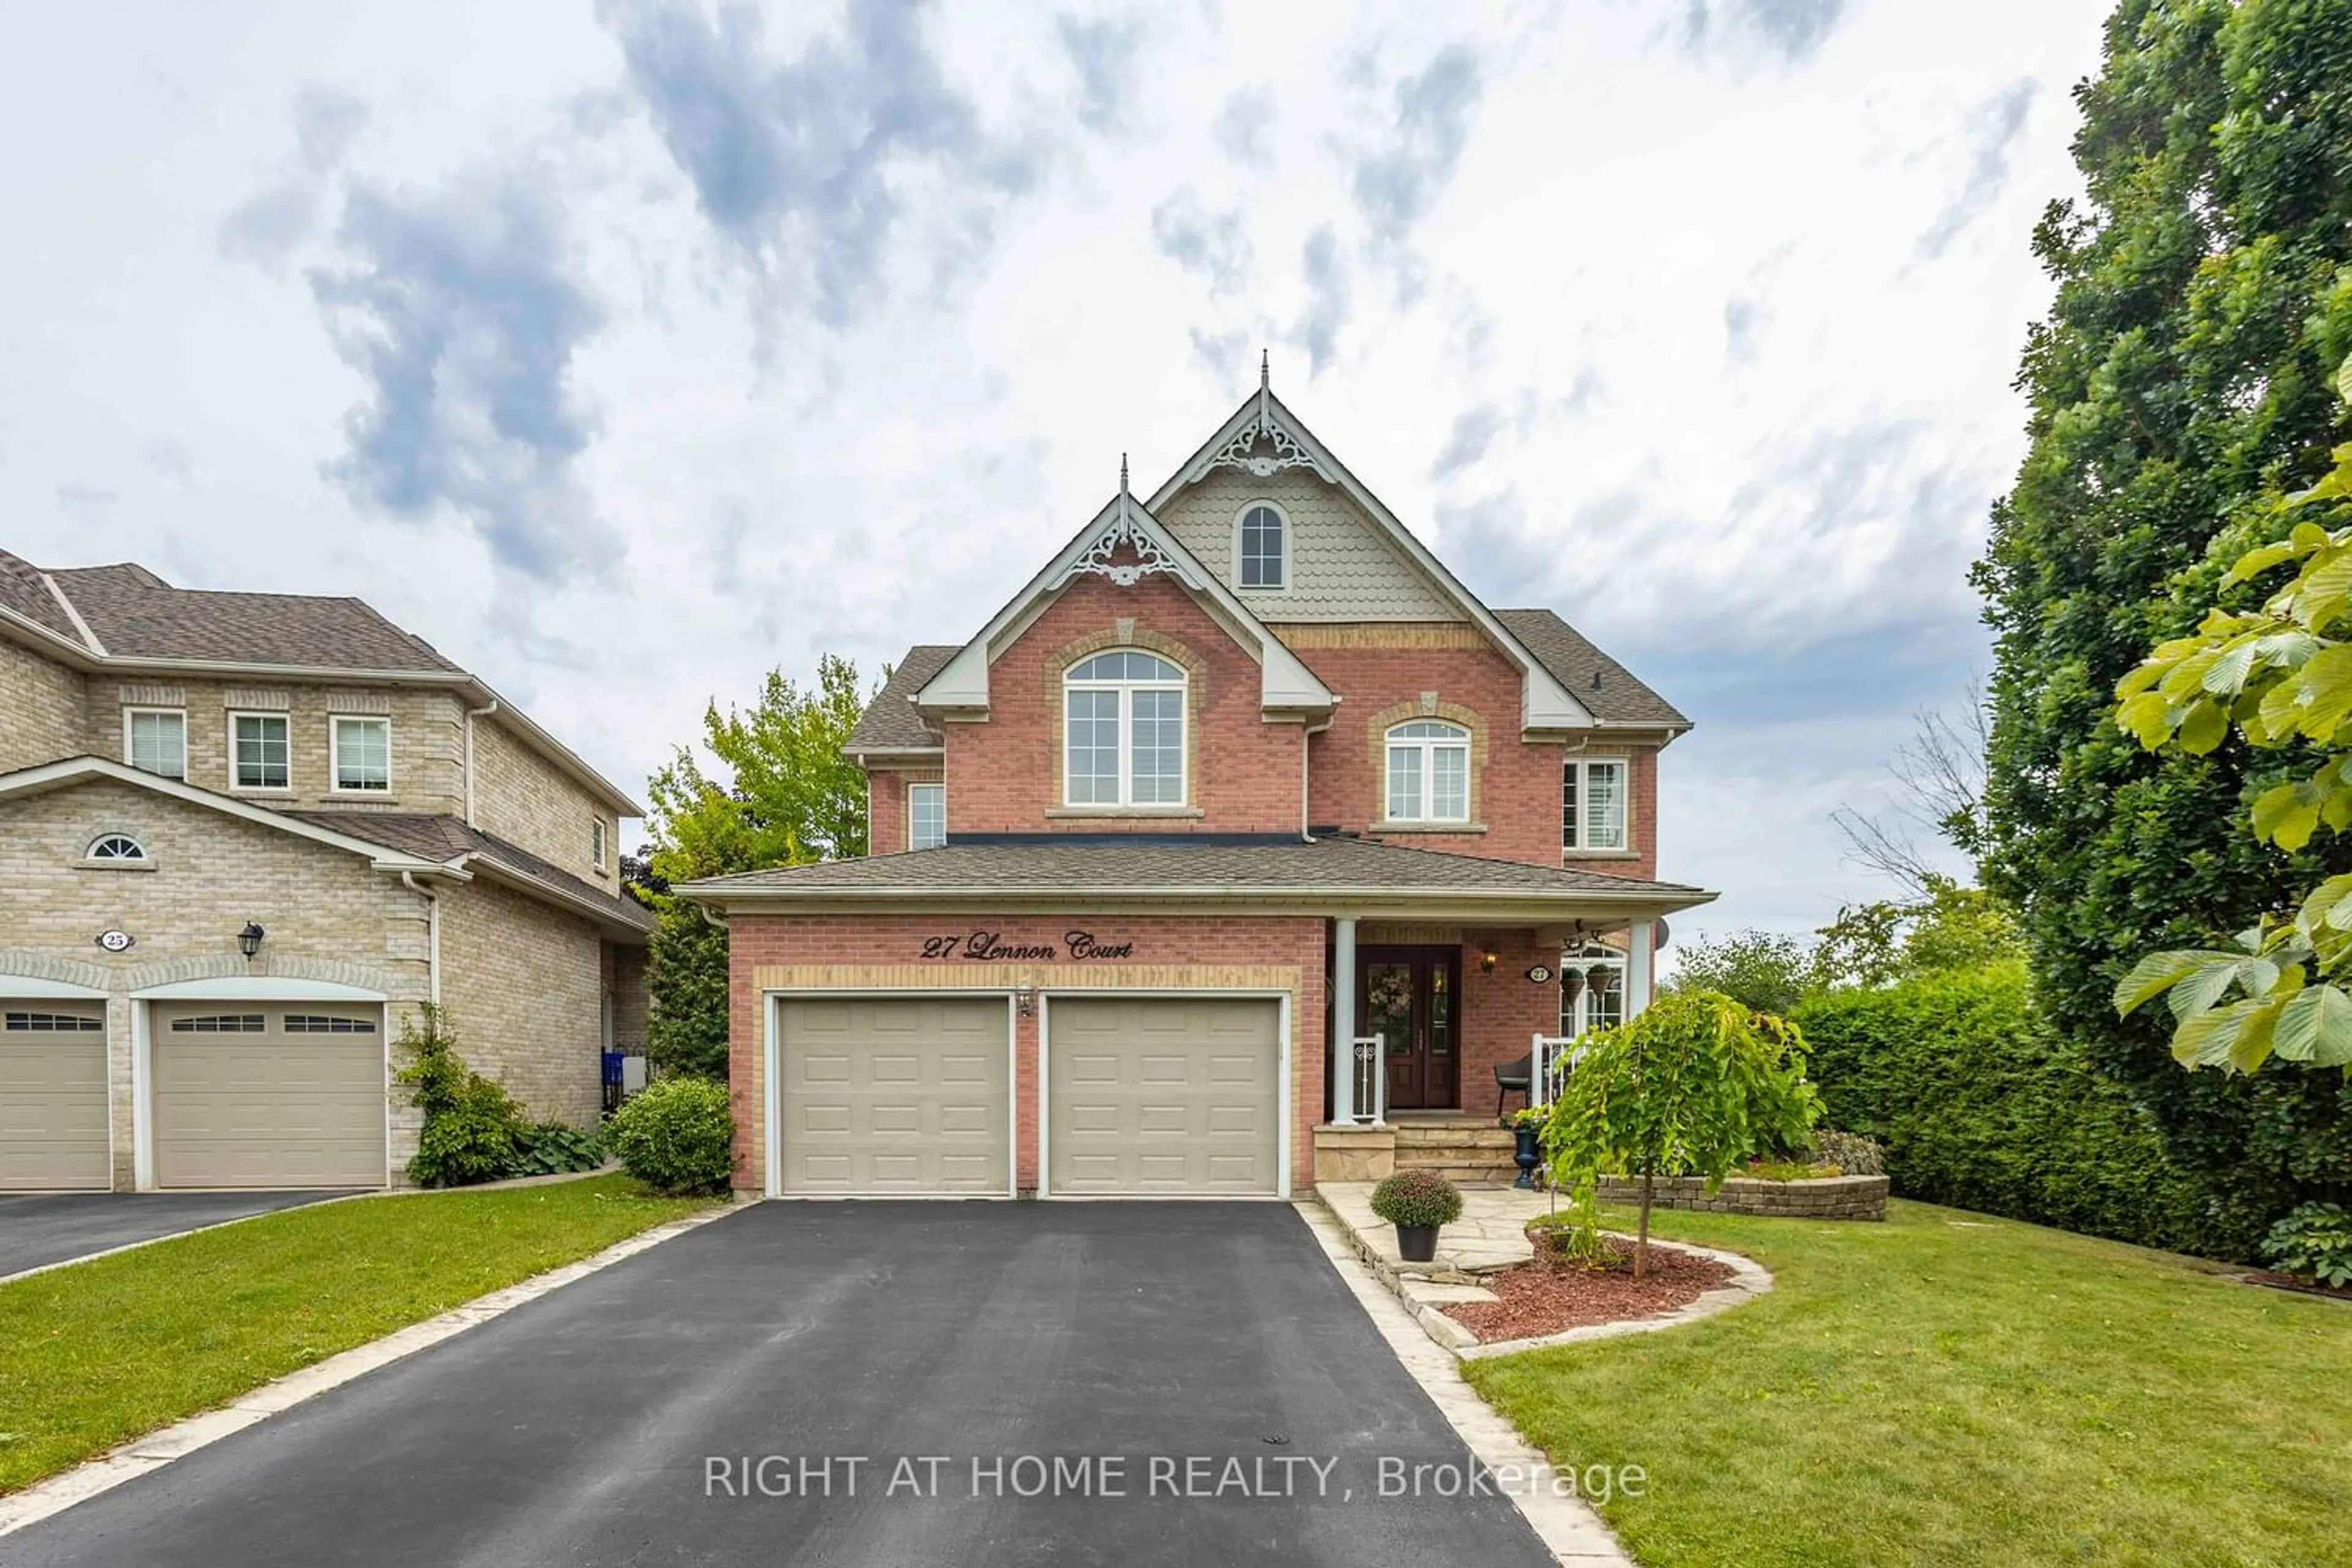 Home with brick exterior material for 27 Lennon Crt, Whitby Ontario L1P 1P4